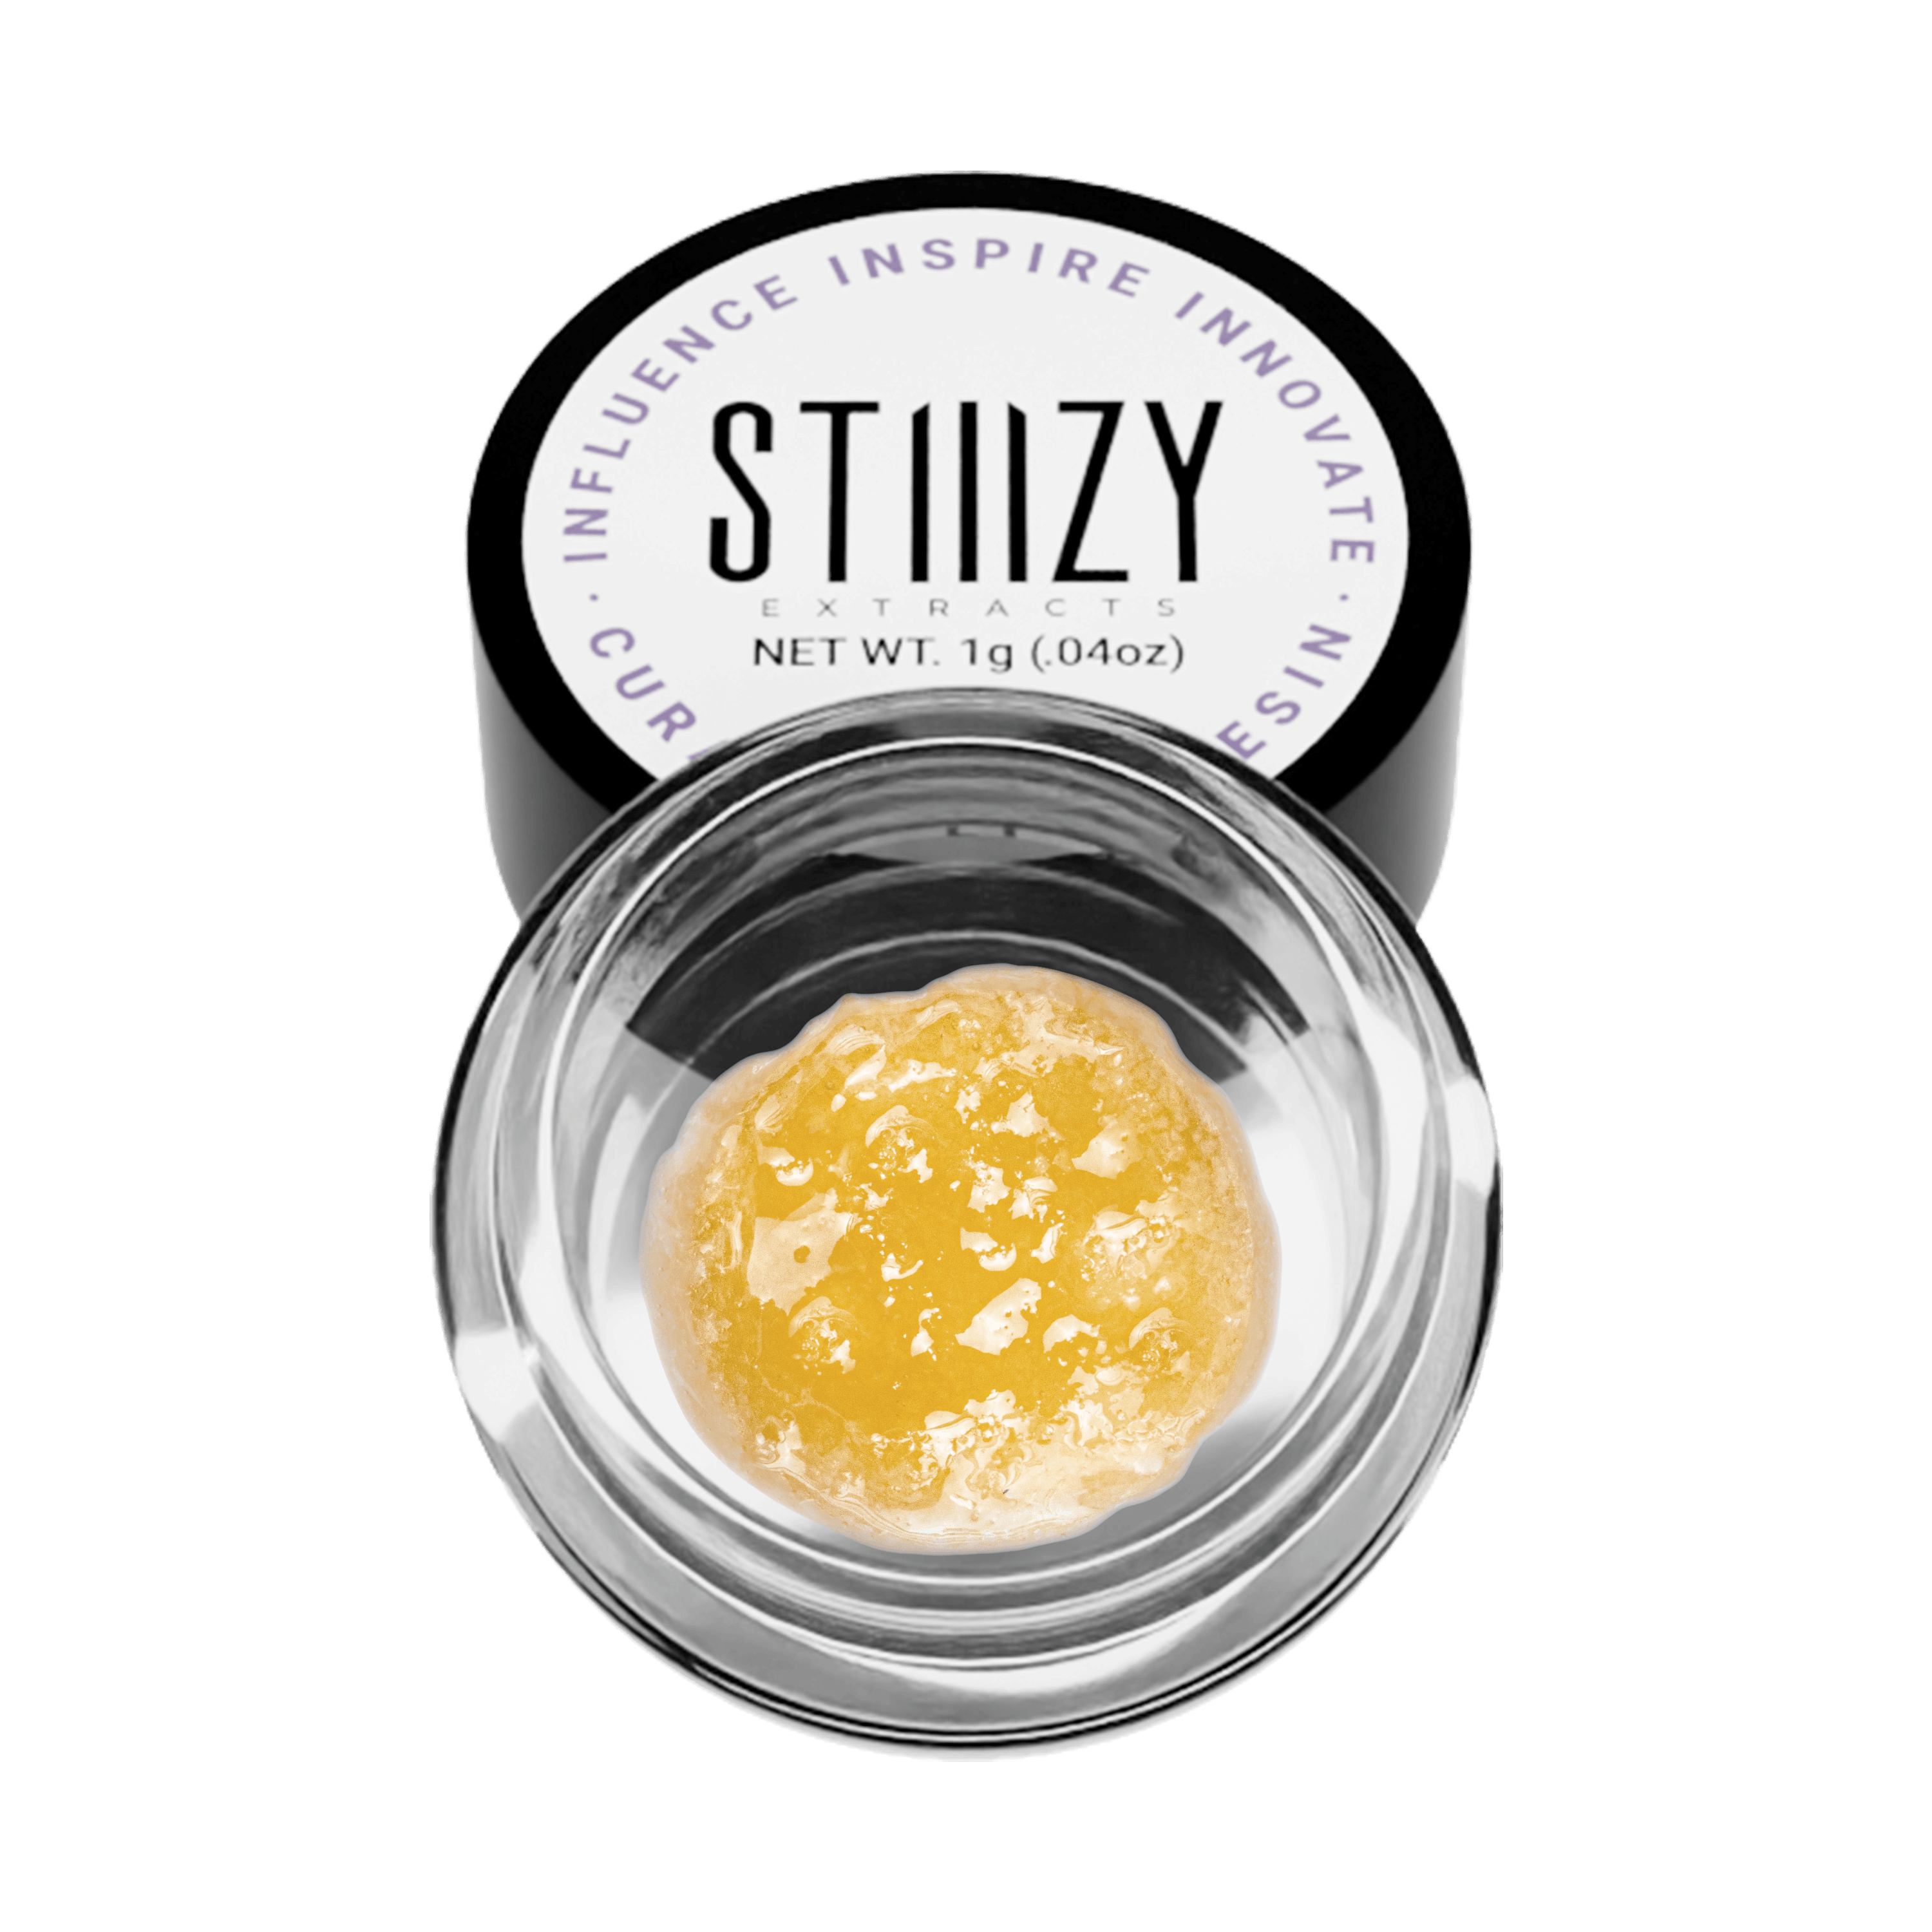 Live resin diamonds from the White Truffle strain are displayed inside their open glass jar.